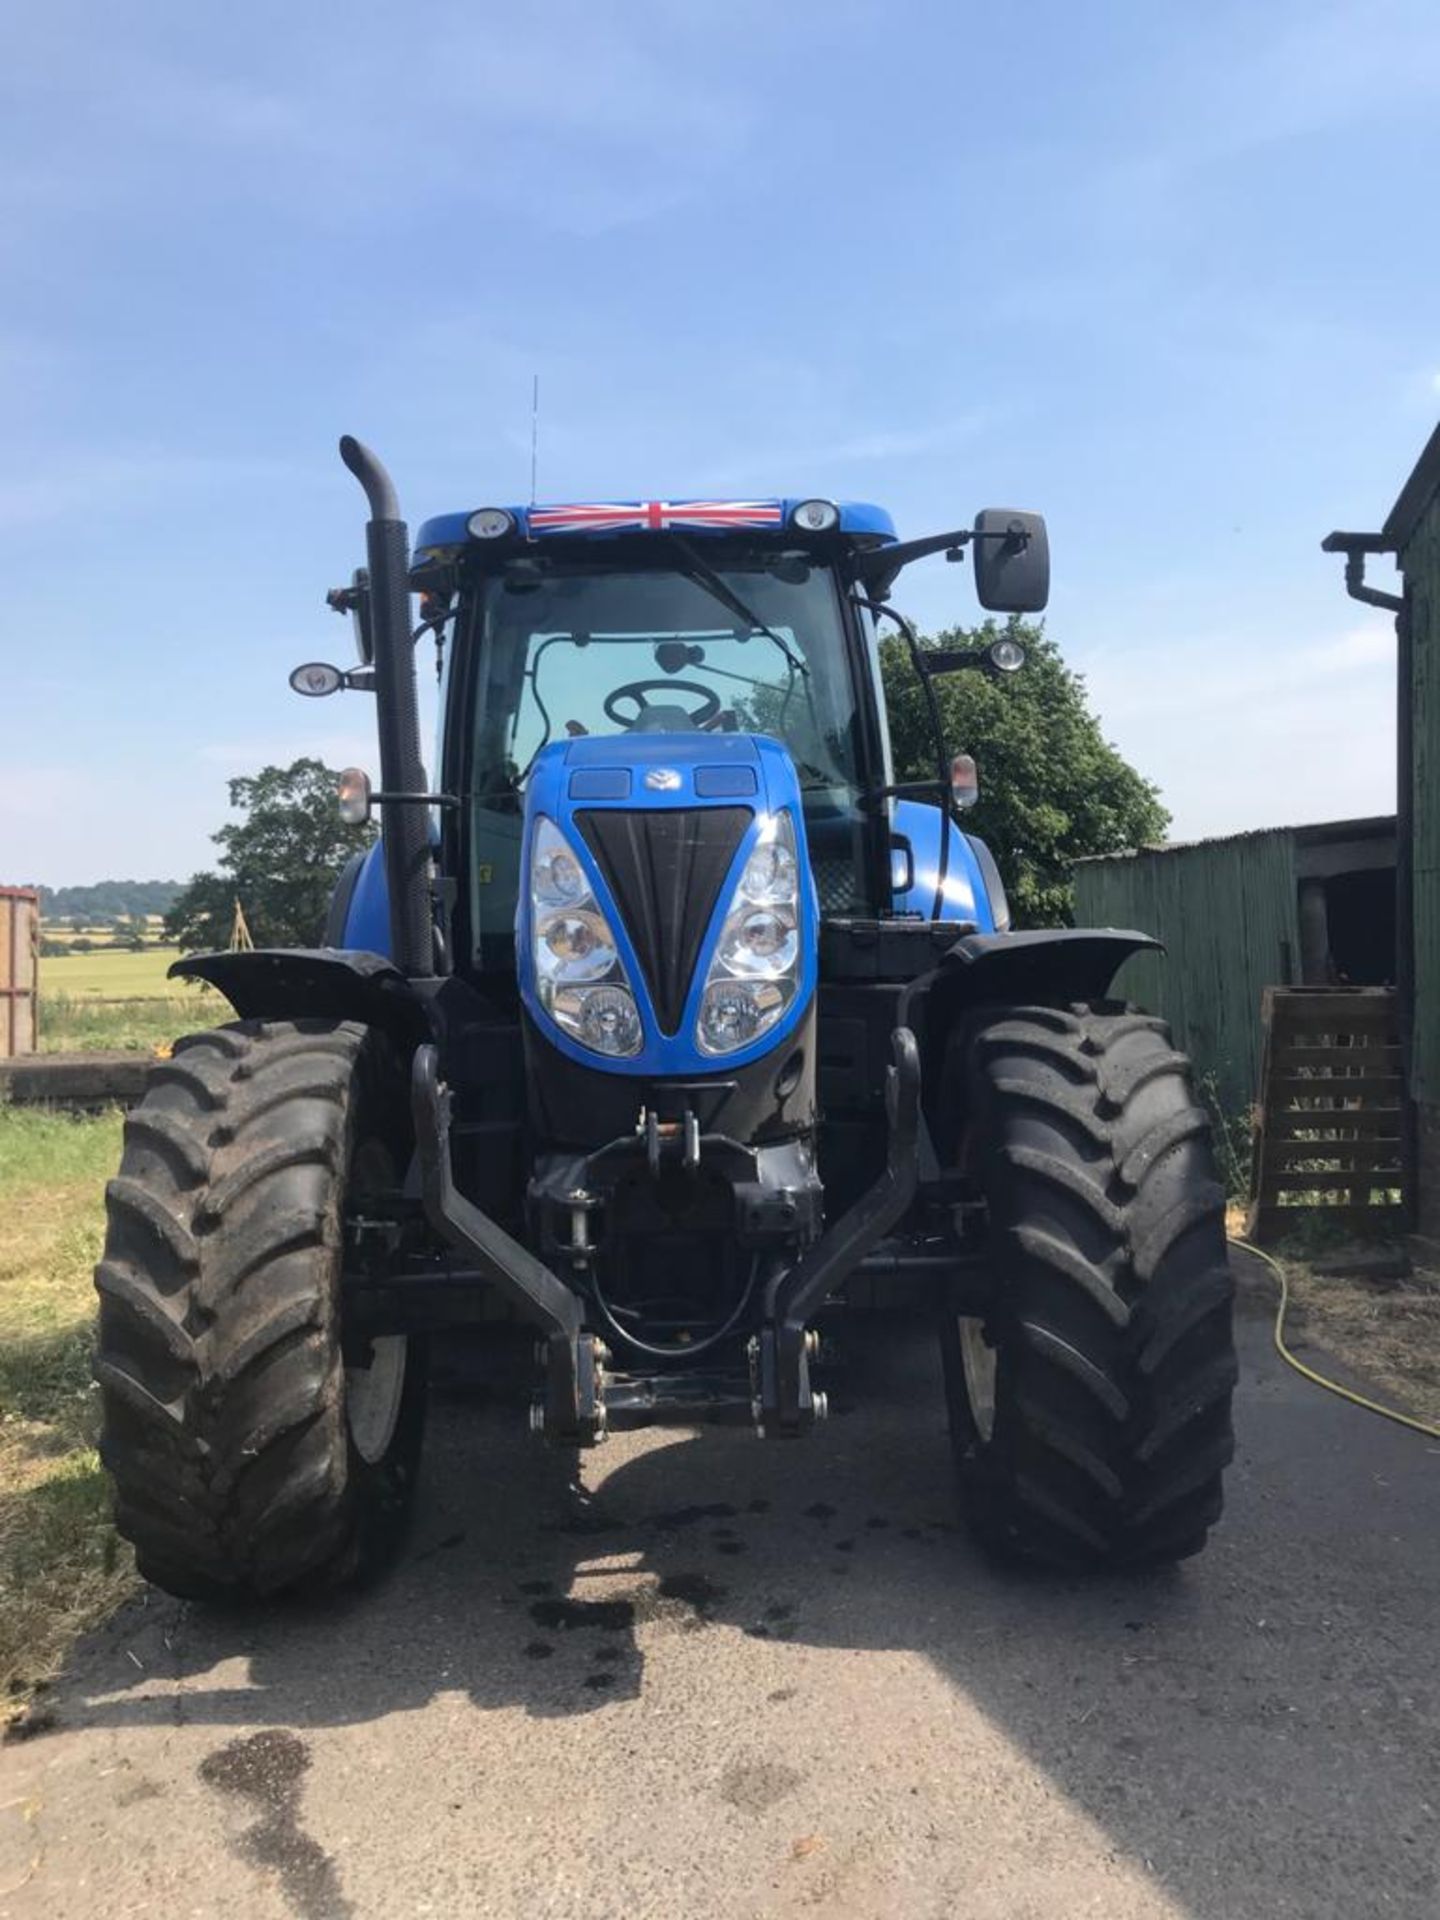 2013/63 REG NEW HOLLAND T7.200 TRACTOR warranted 2236 hrs RUNS AND WORKS AS IT SHOULD. - Image 2 of 16